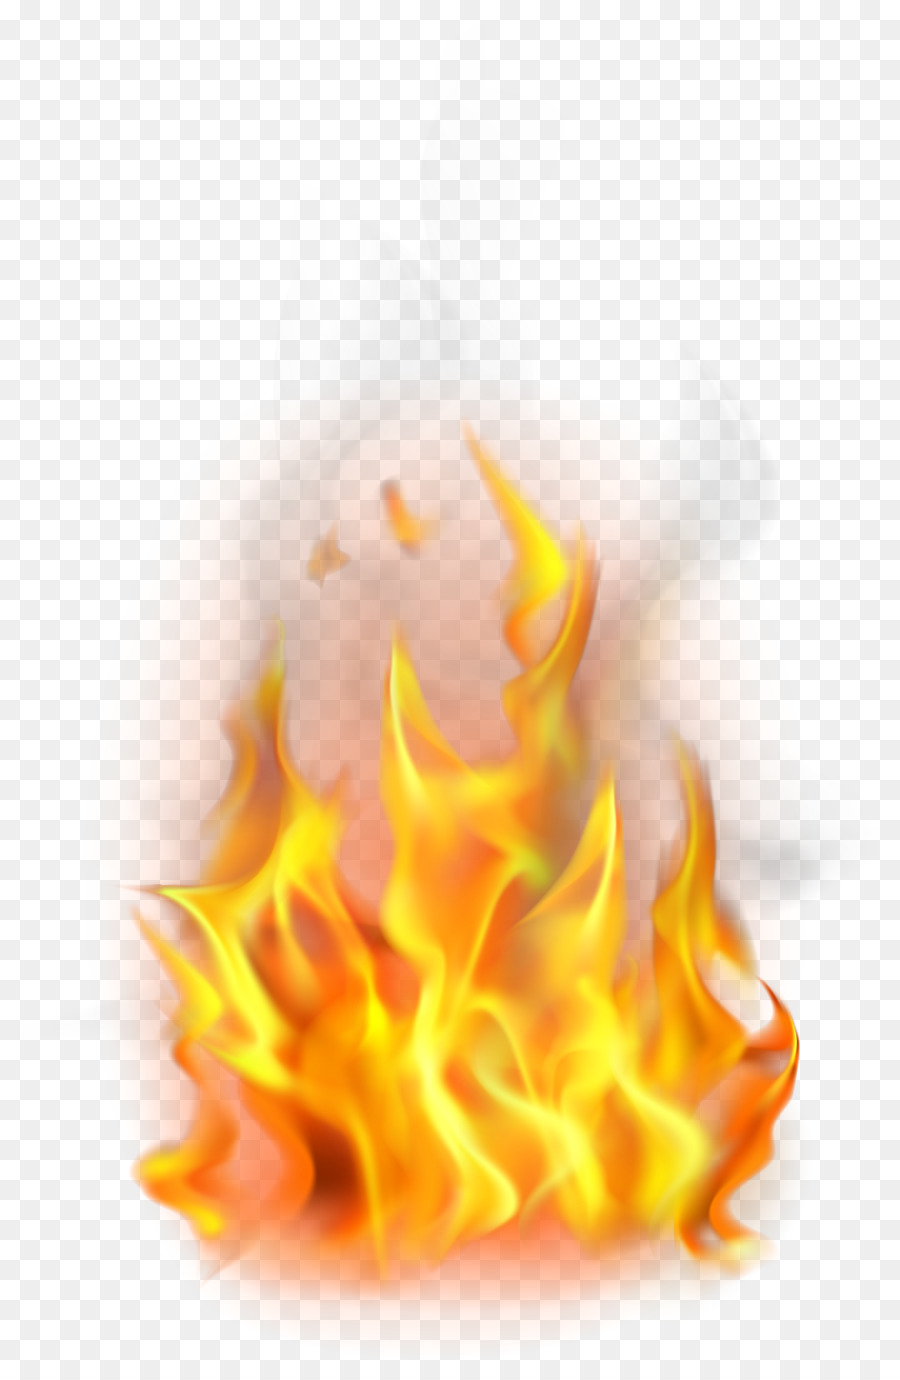 Fire Flame - Fire PNG image png download - 1600*650 - Free Transparent